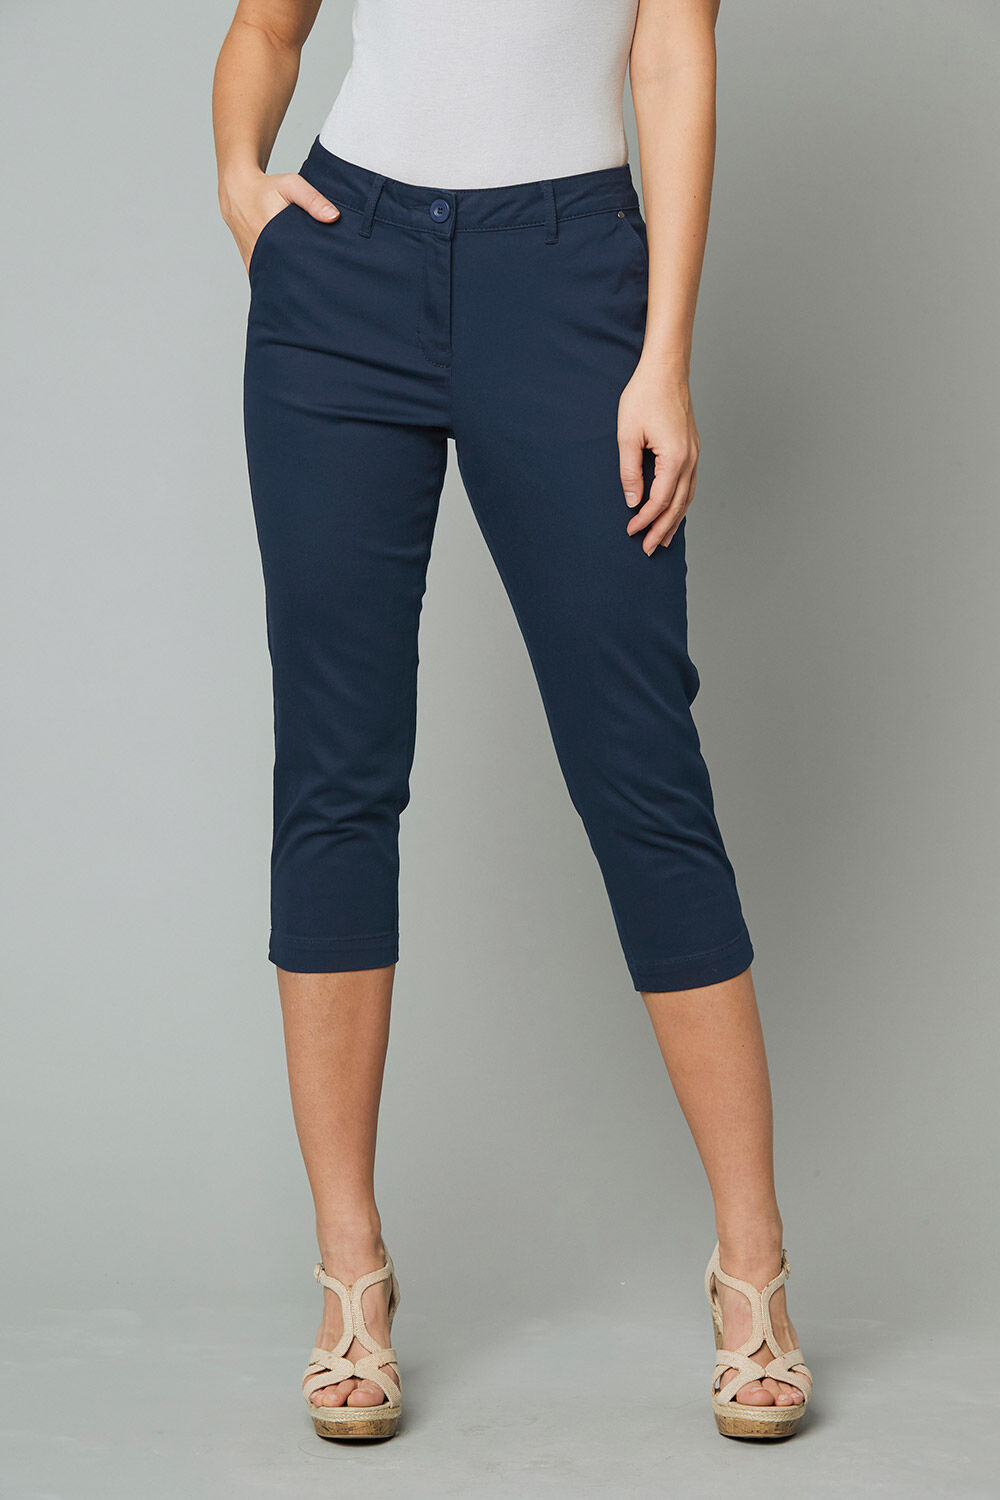 LADIES WOMEN CROPPED Trousers Rayon Elasticated Stretch Summer Capri 10 to  26 £11.95 - PicClick UK